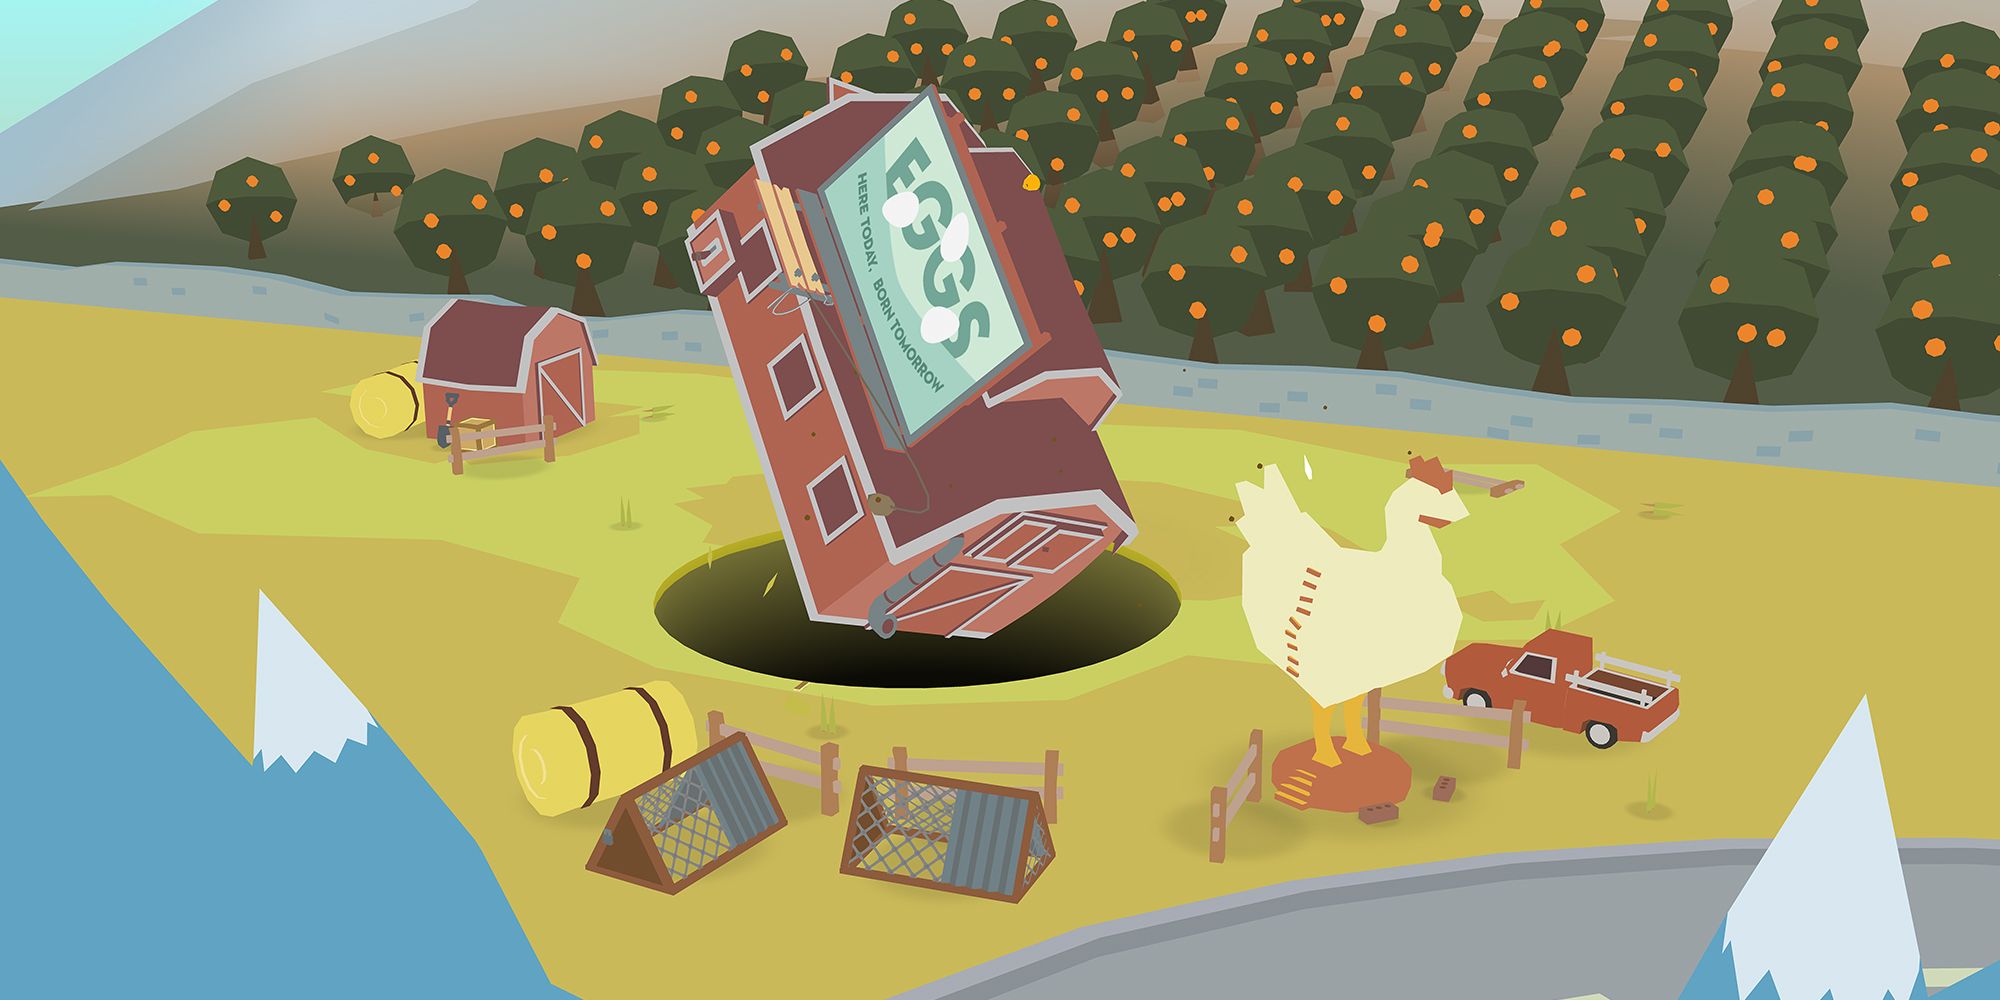 Donut County example of a Barn falling into the giant hole in the ground. The barn has a billboard on it that says "Eggs"